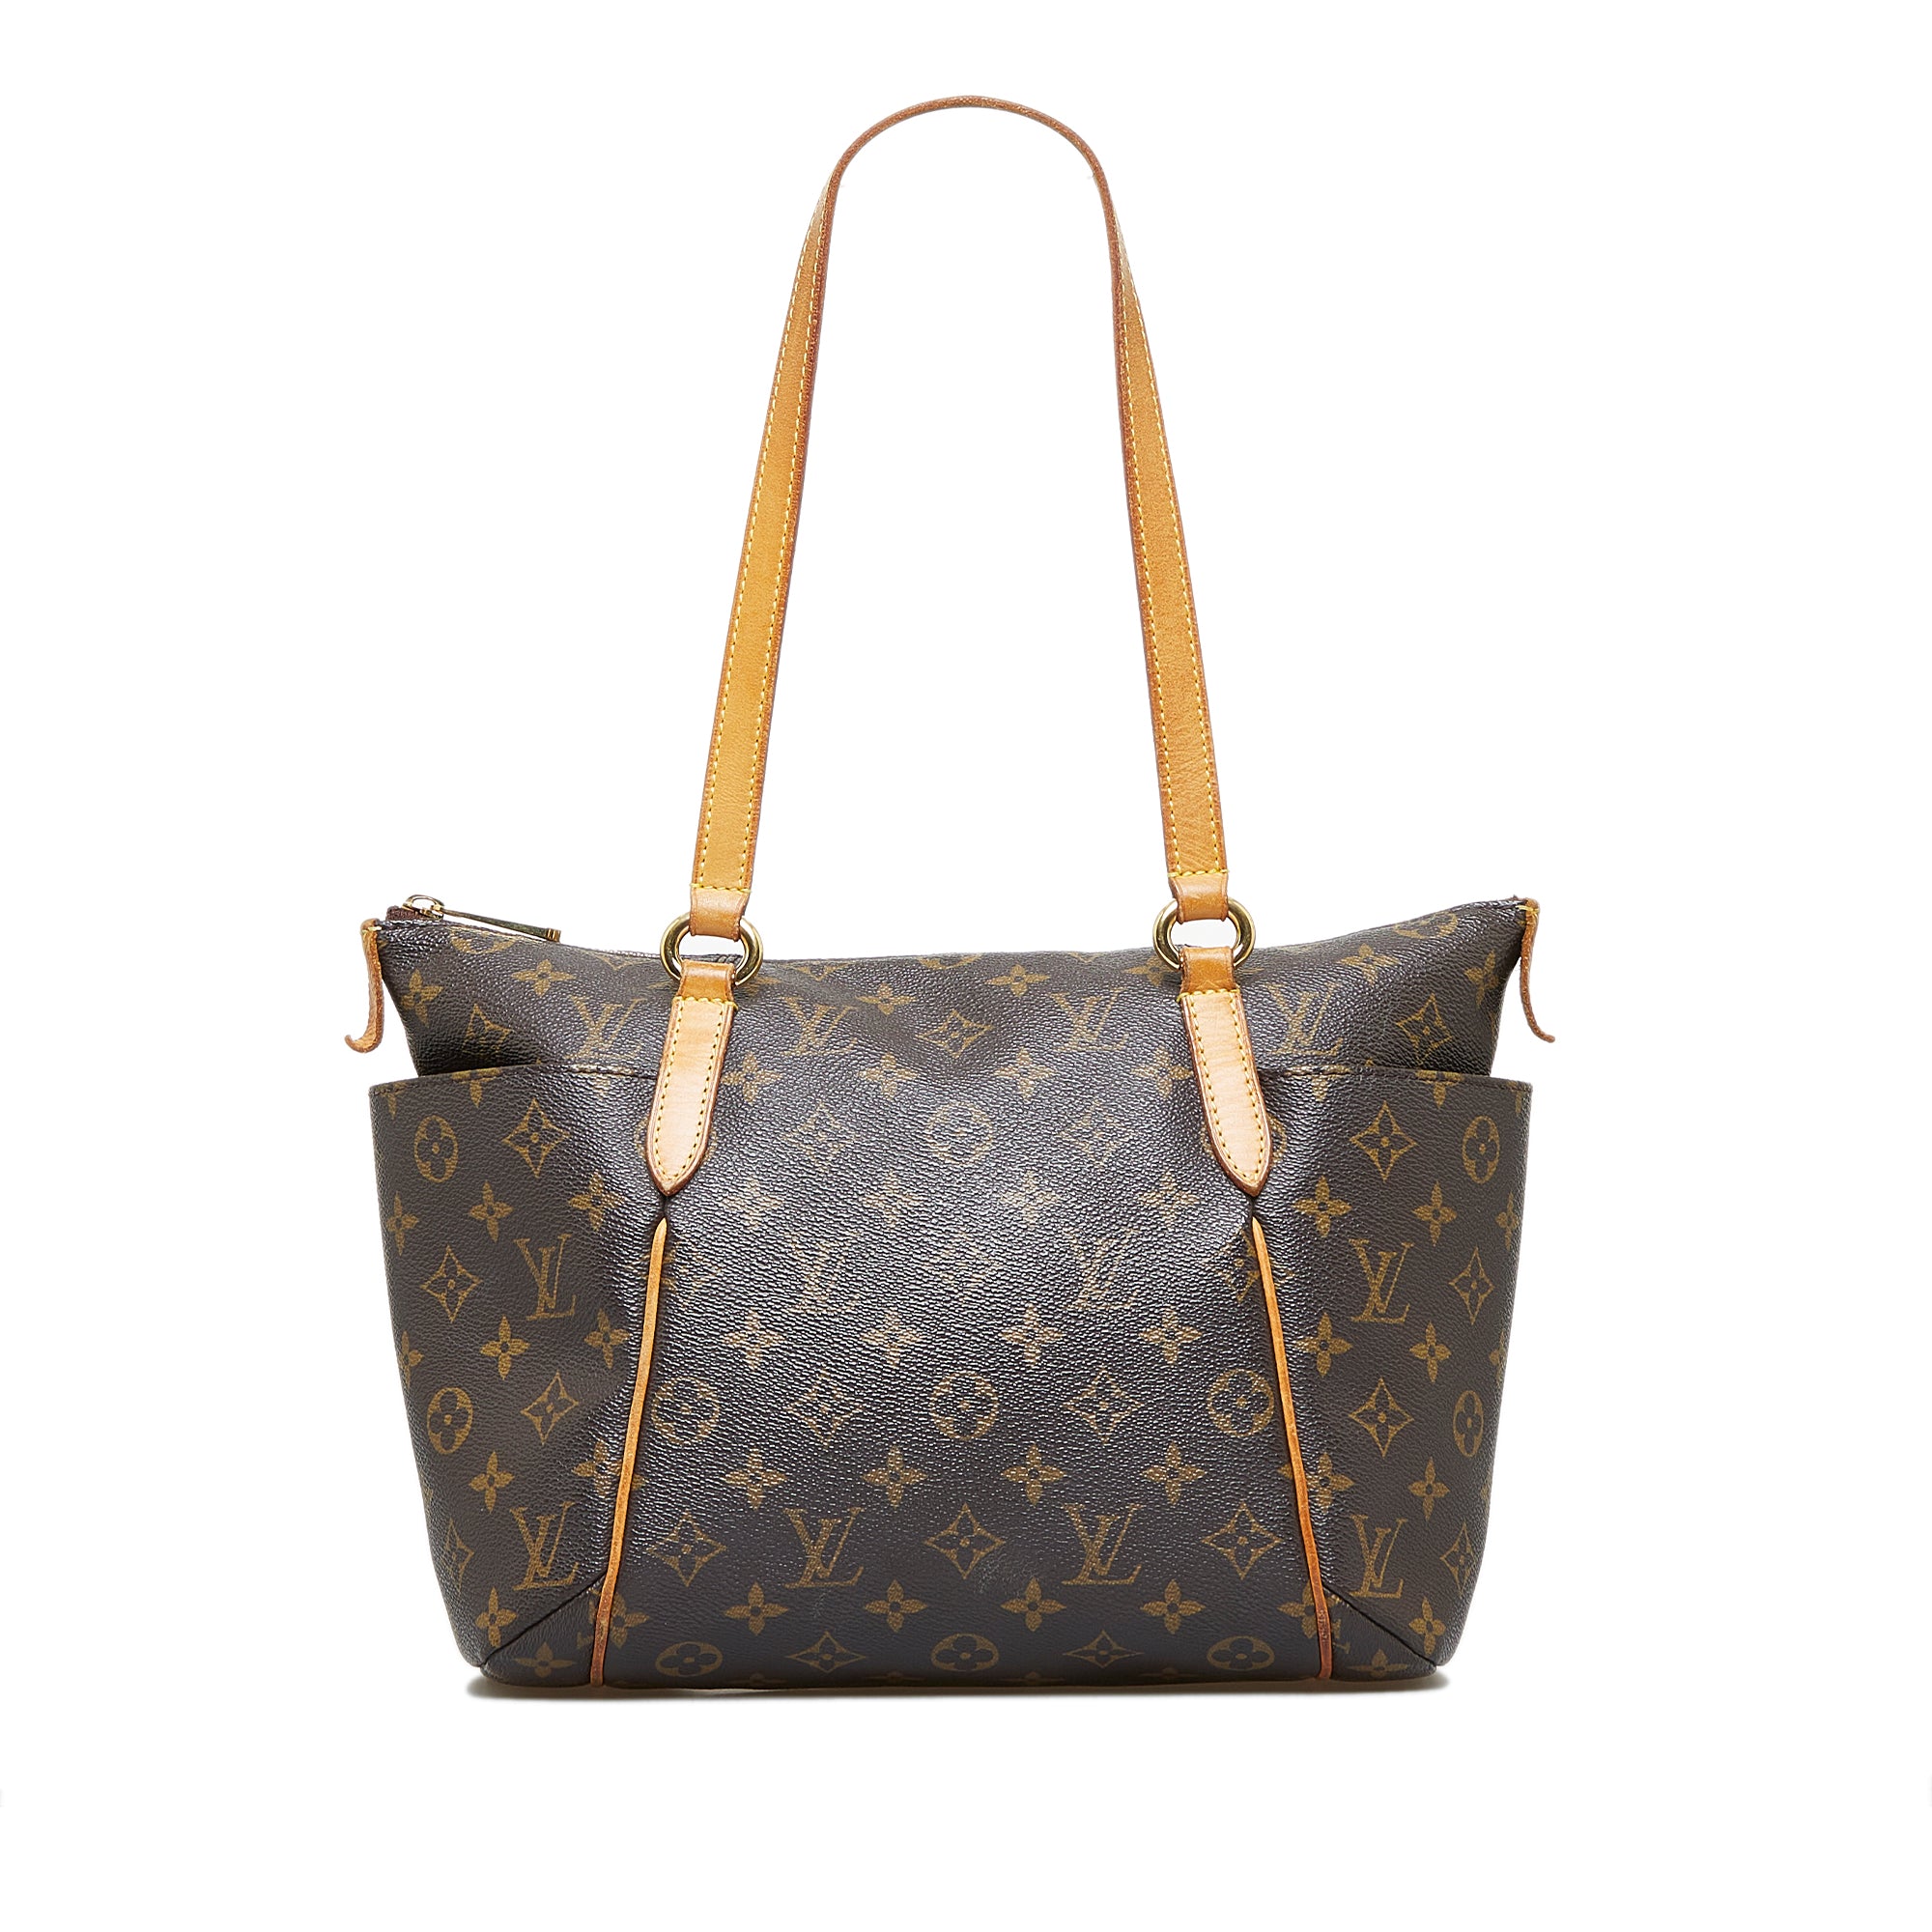 Louis Vuitton, Bags, Authentic Louis Vuitton Totally Pm Date Code Avail